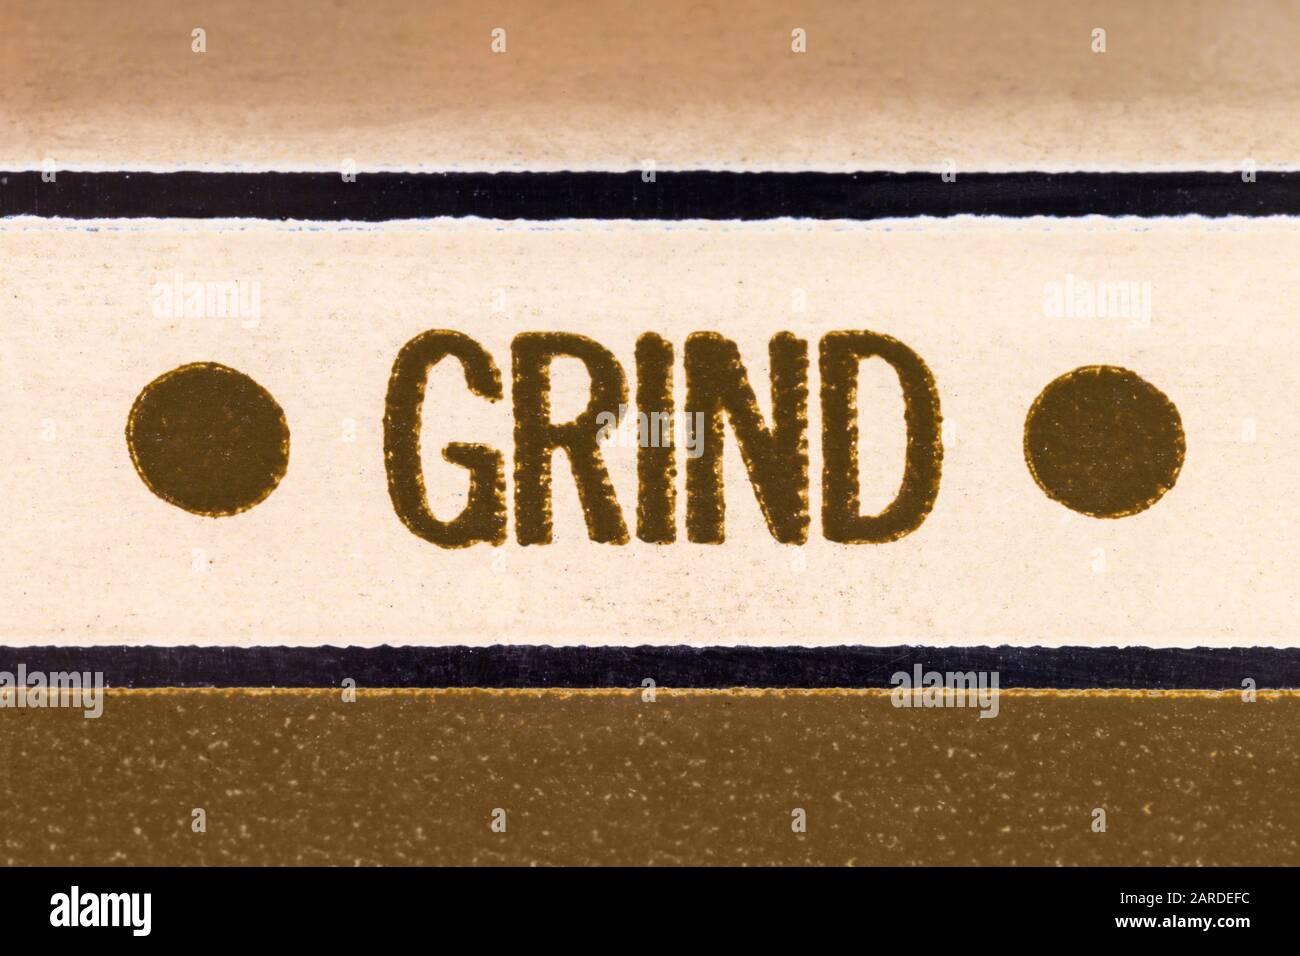 Macro close up photograph of grind button detail on vintage blender. Stock Photo